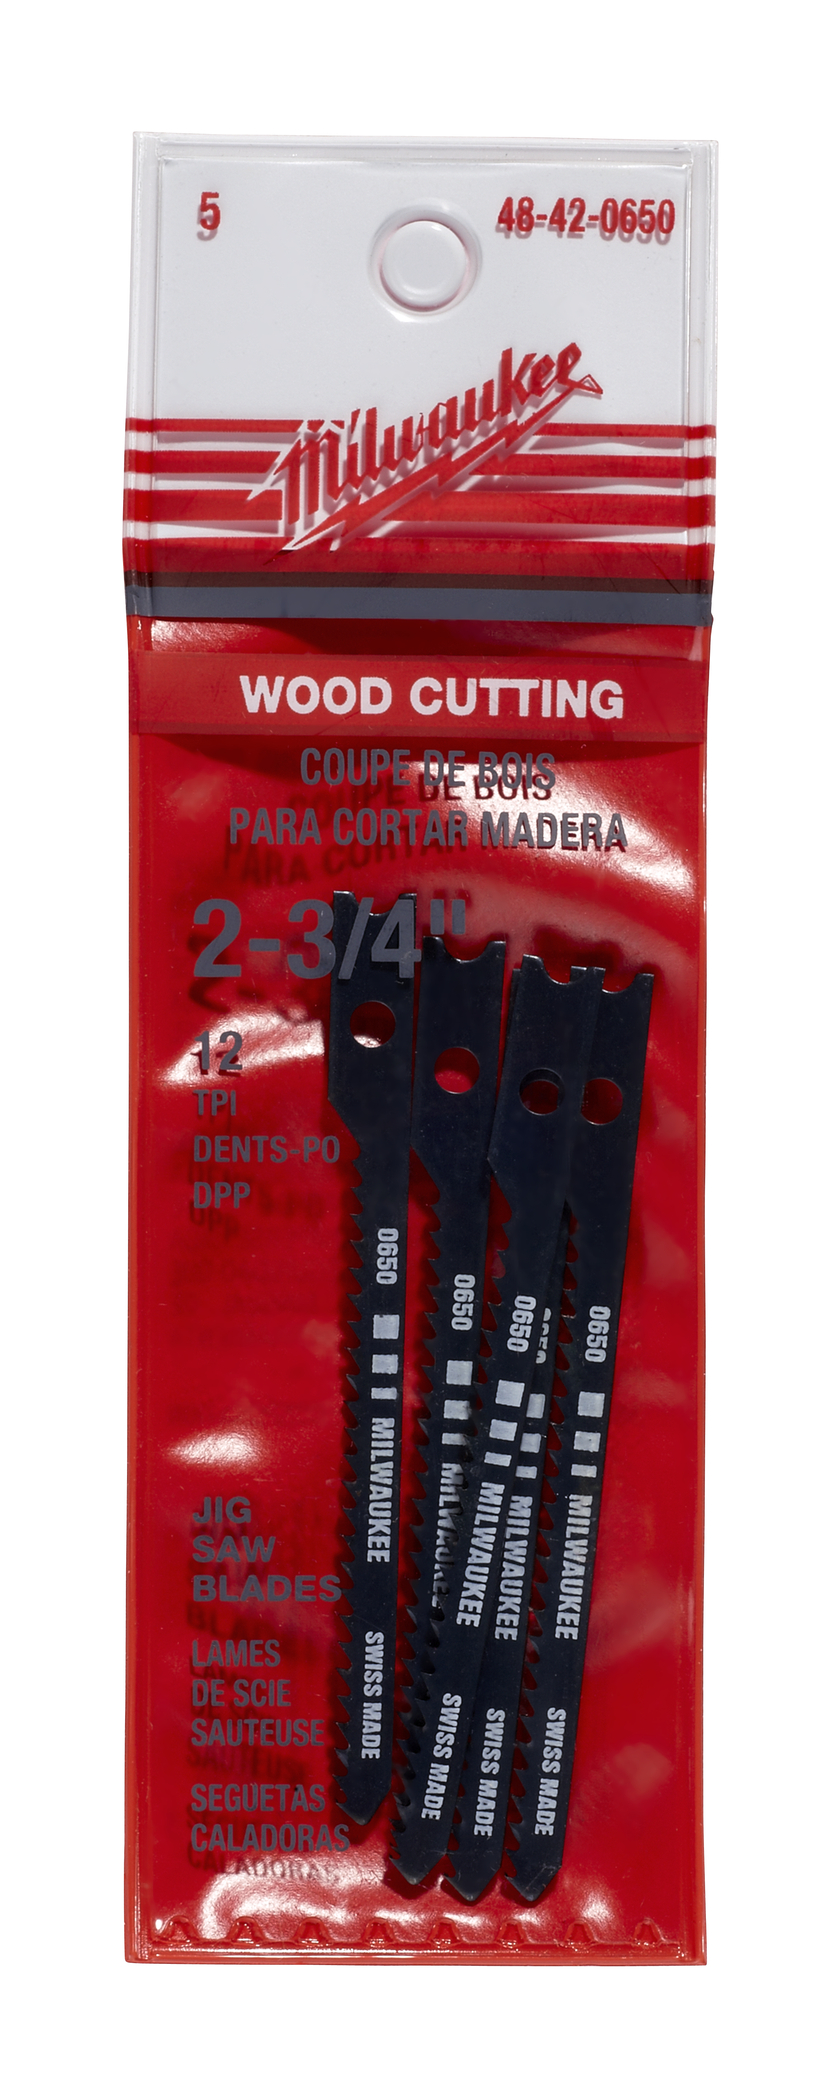 2-3/4 in. 12 TPI High Carbon Steel Jig Saw Blade - 5 Pack